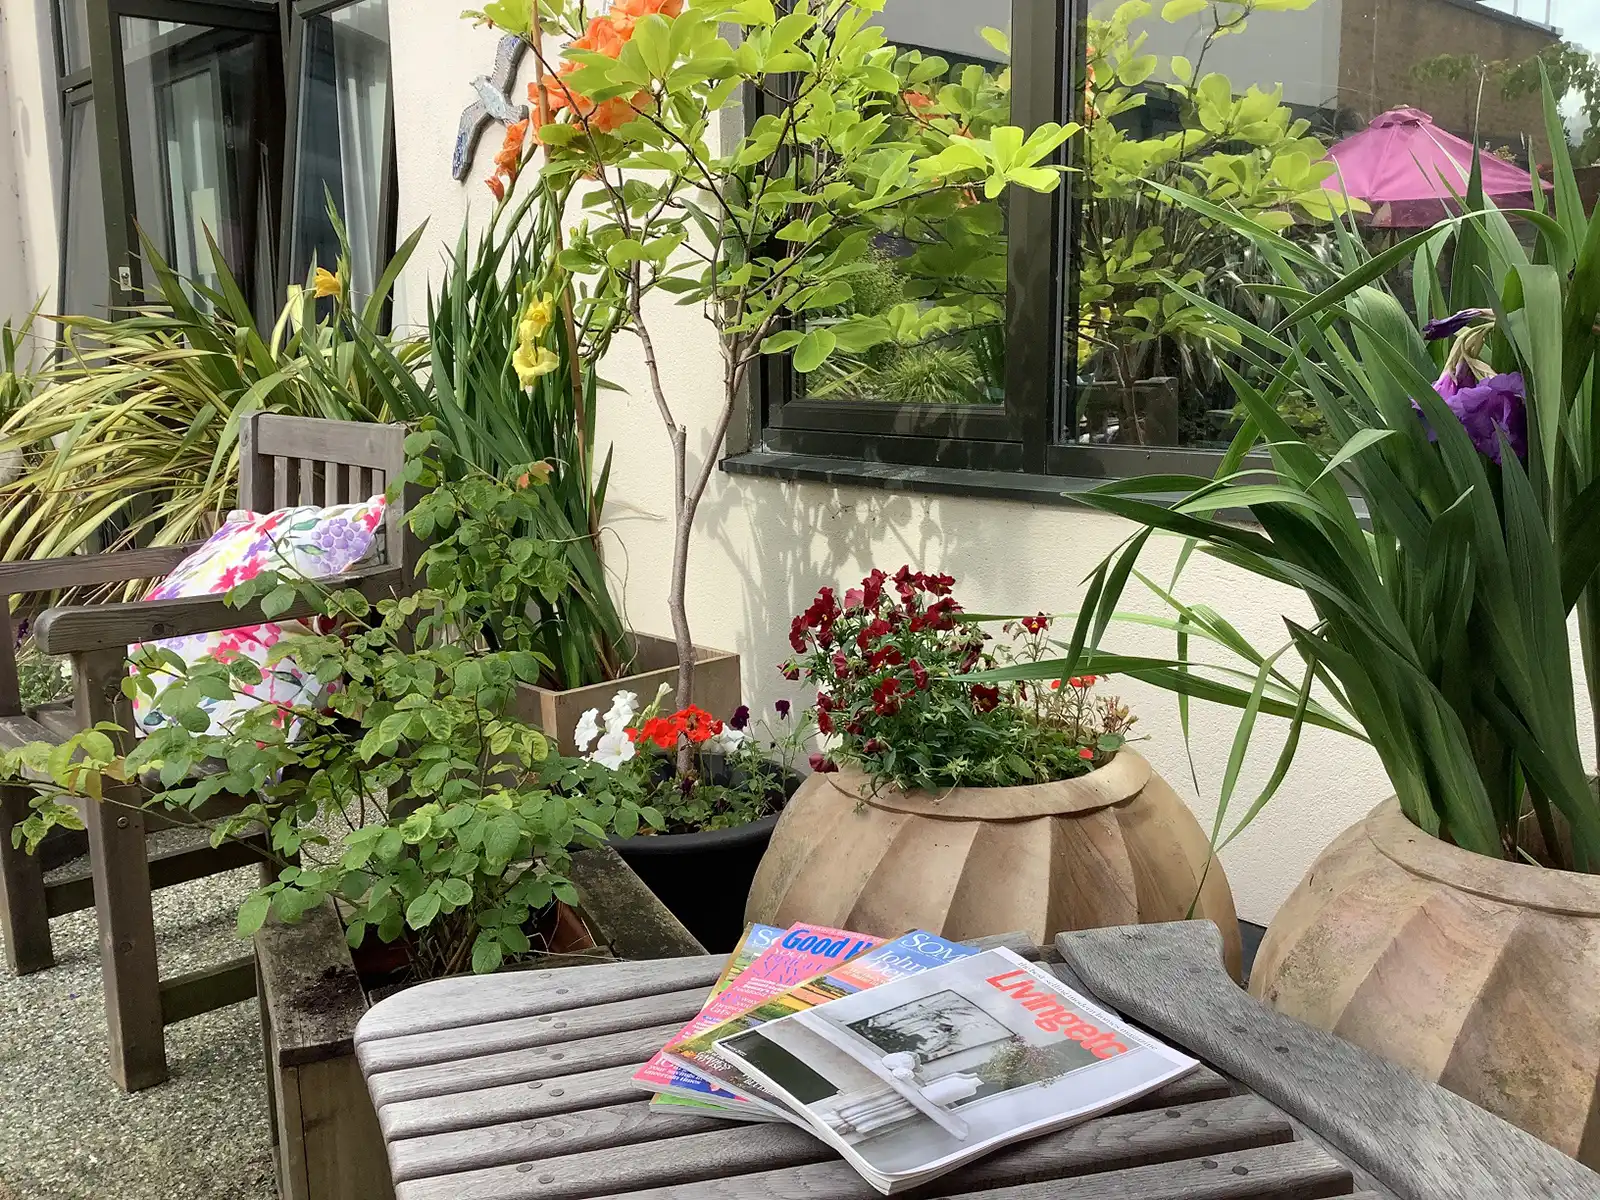 The garden aims to make time in hospital for dementia patients as easy as possible